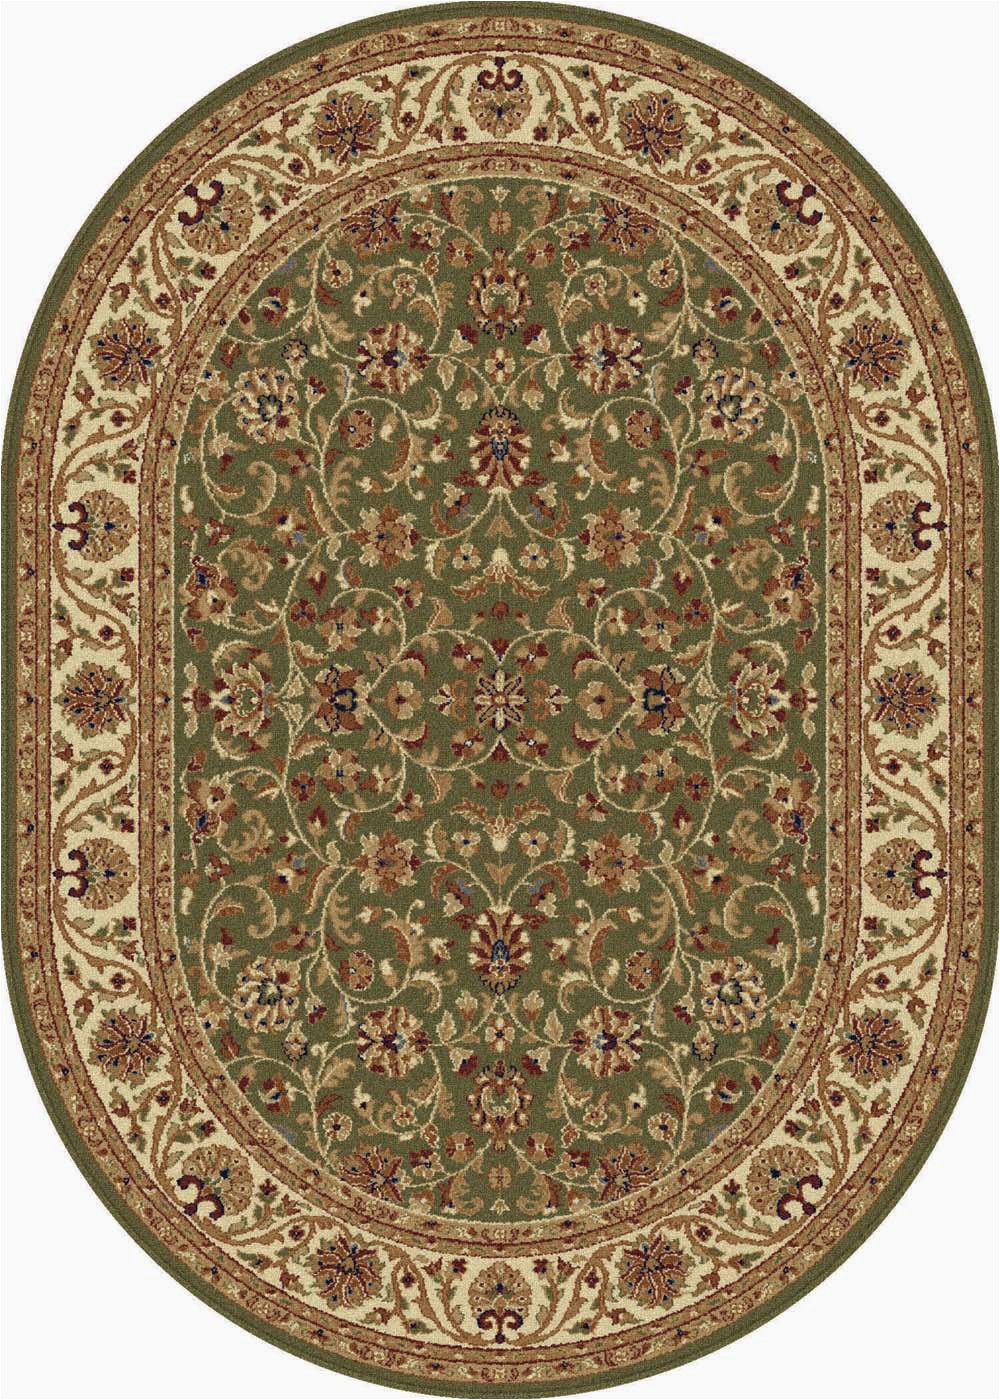 7 X 9 Oval area Rugs Details About 6×9 Oval Sensation oriental Green Vines Leaves 4815 area Rug Approx 6 7"x9 6"